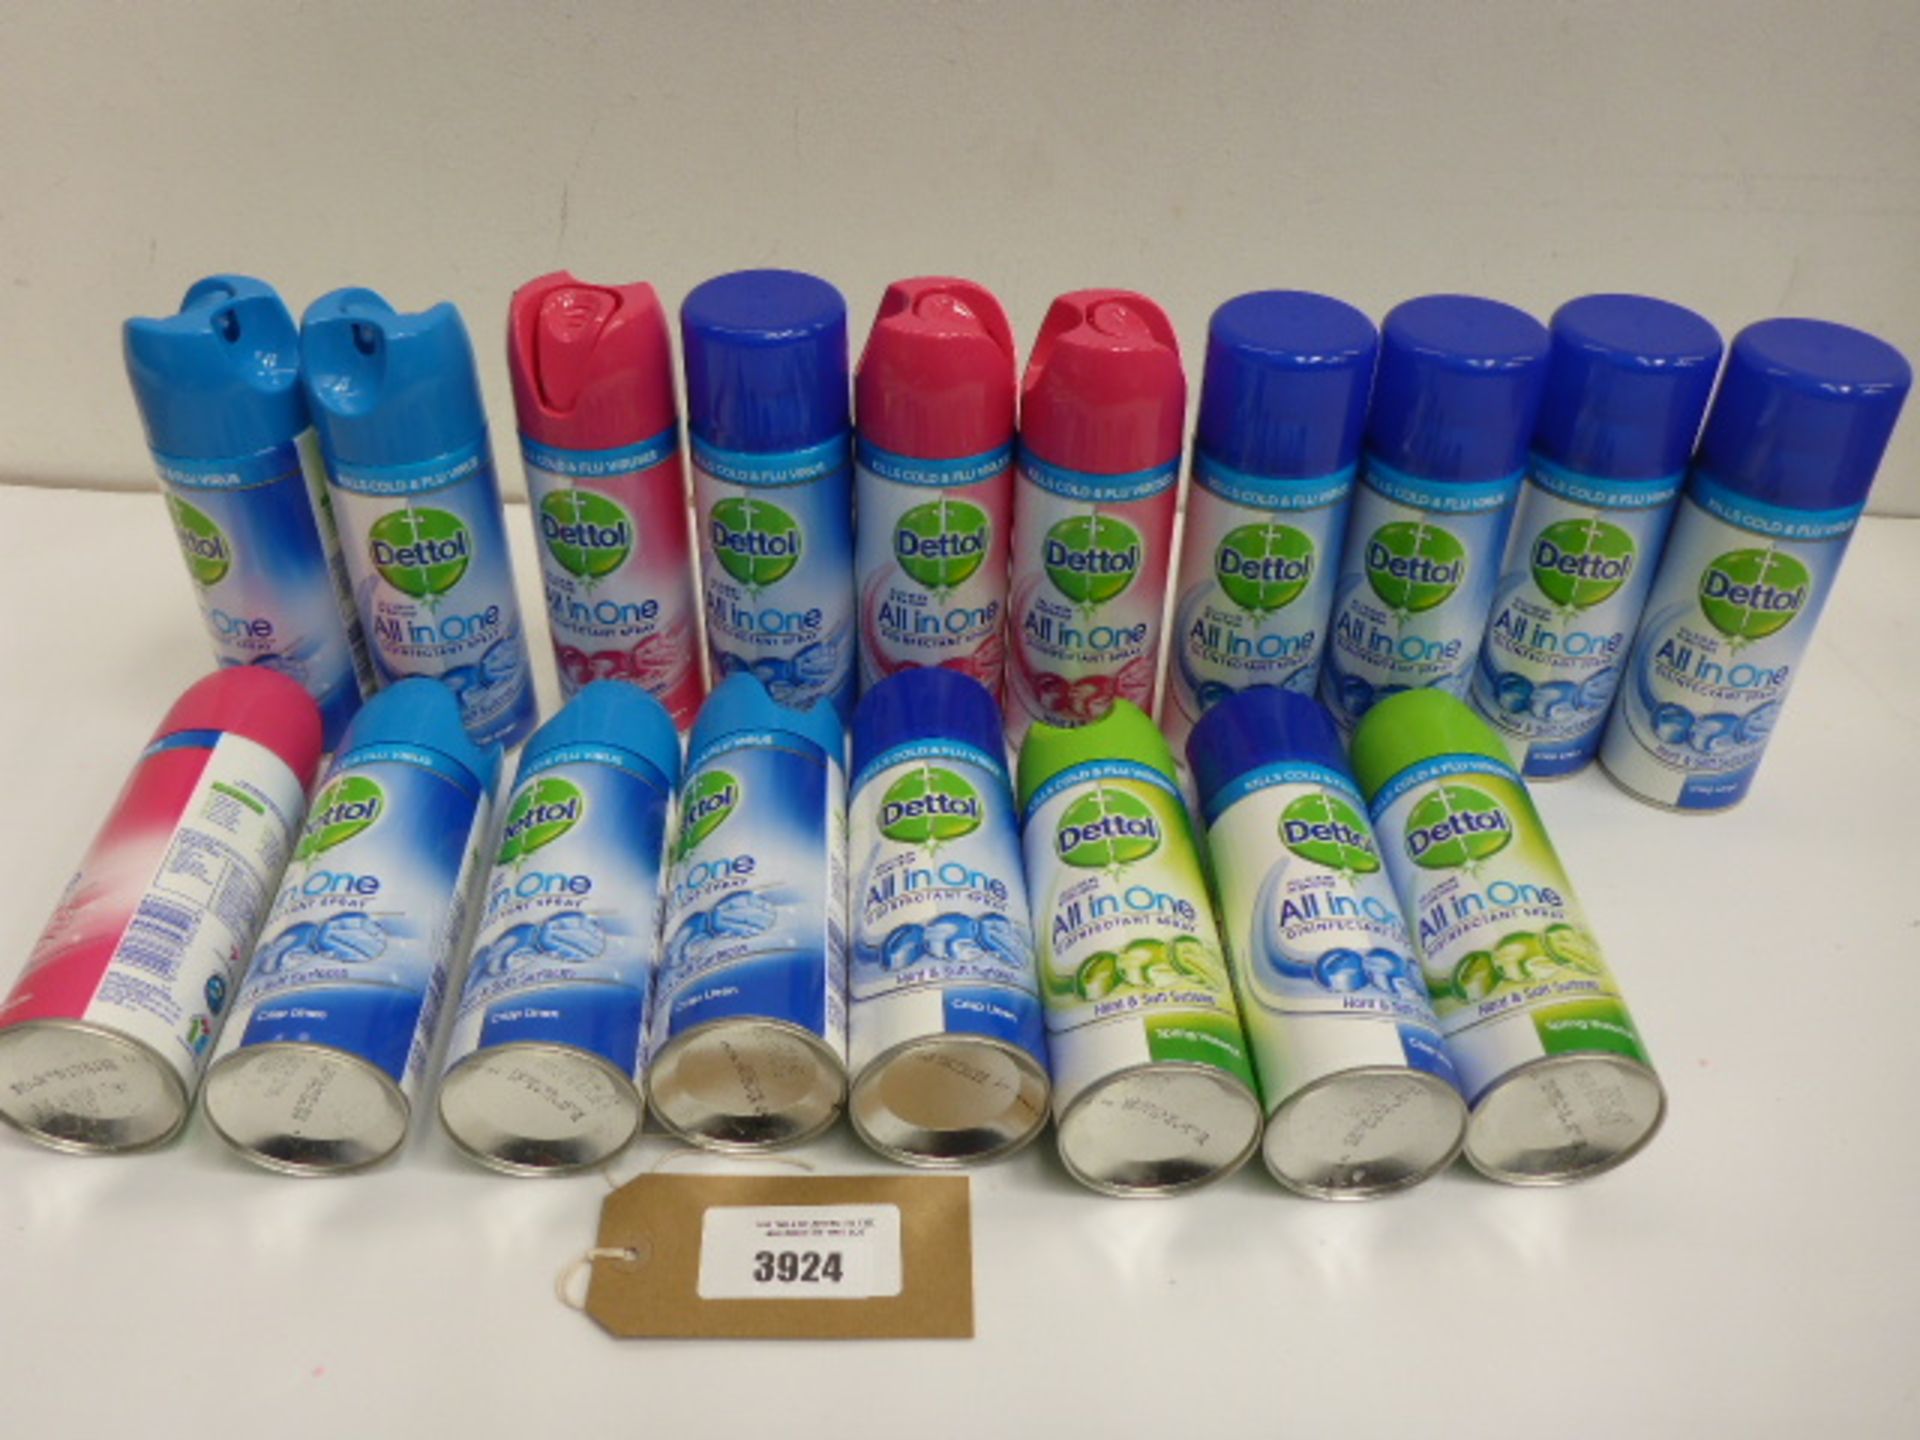 18 cans of Dettol All in One disinfectant sprays